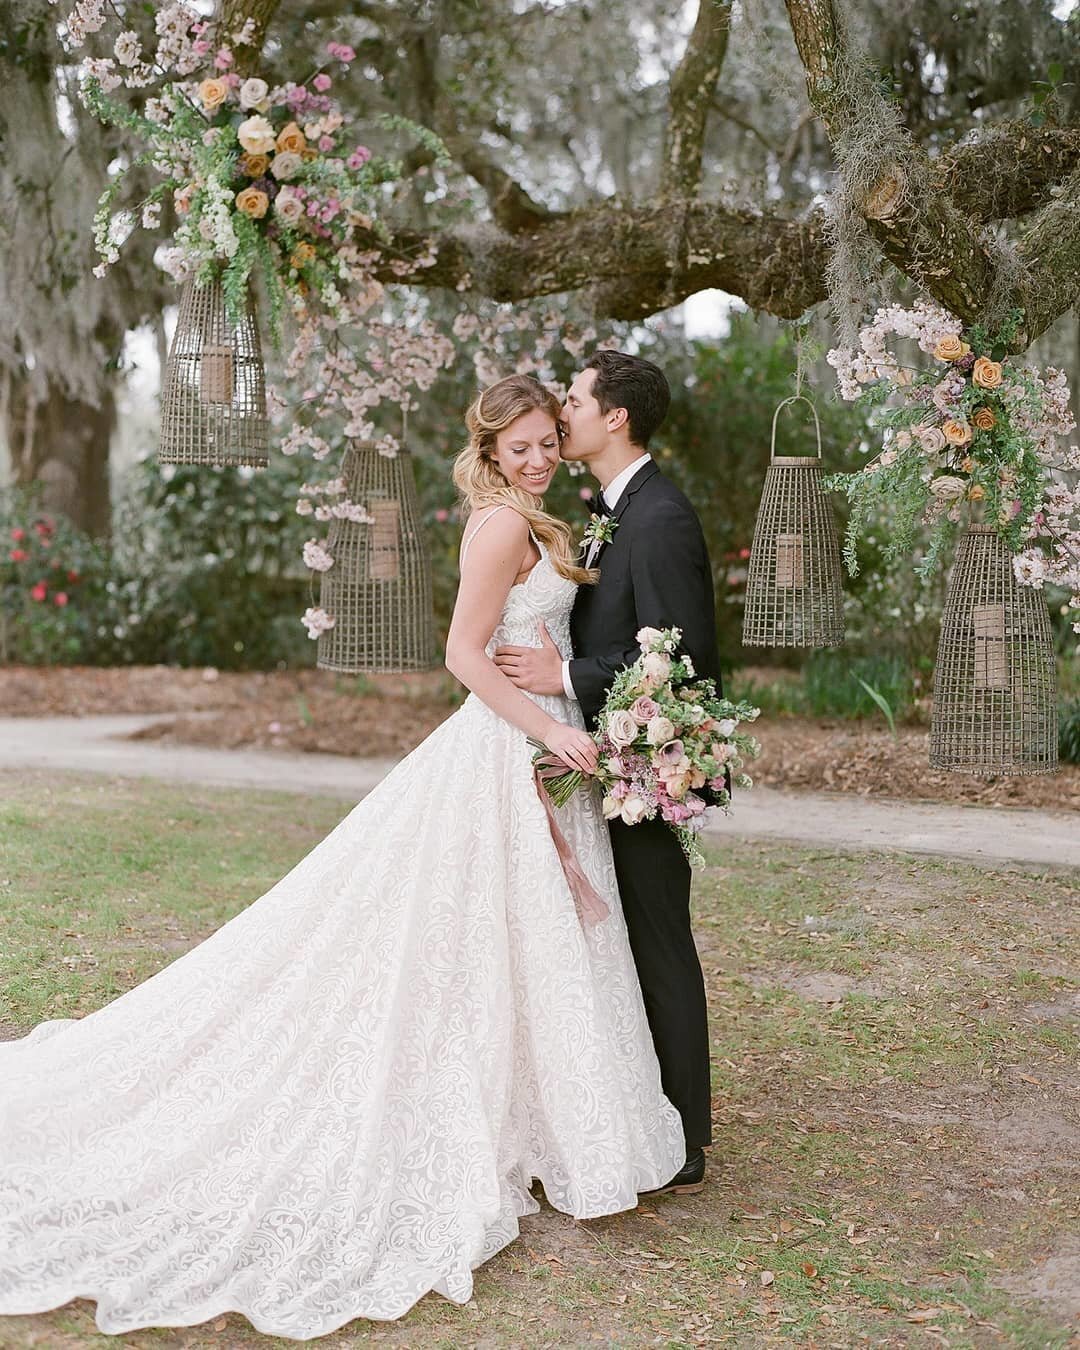 Live oak tree wedding backdrop with floral adorned rattan pendants and a fashionable bride and groom